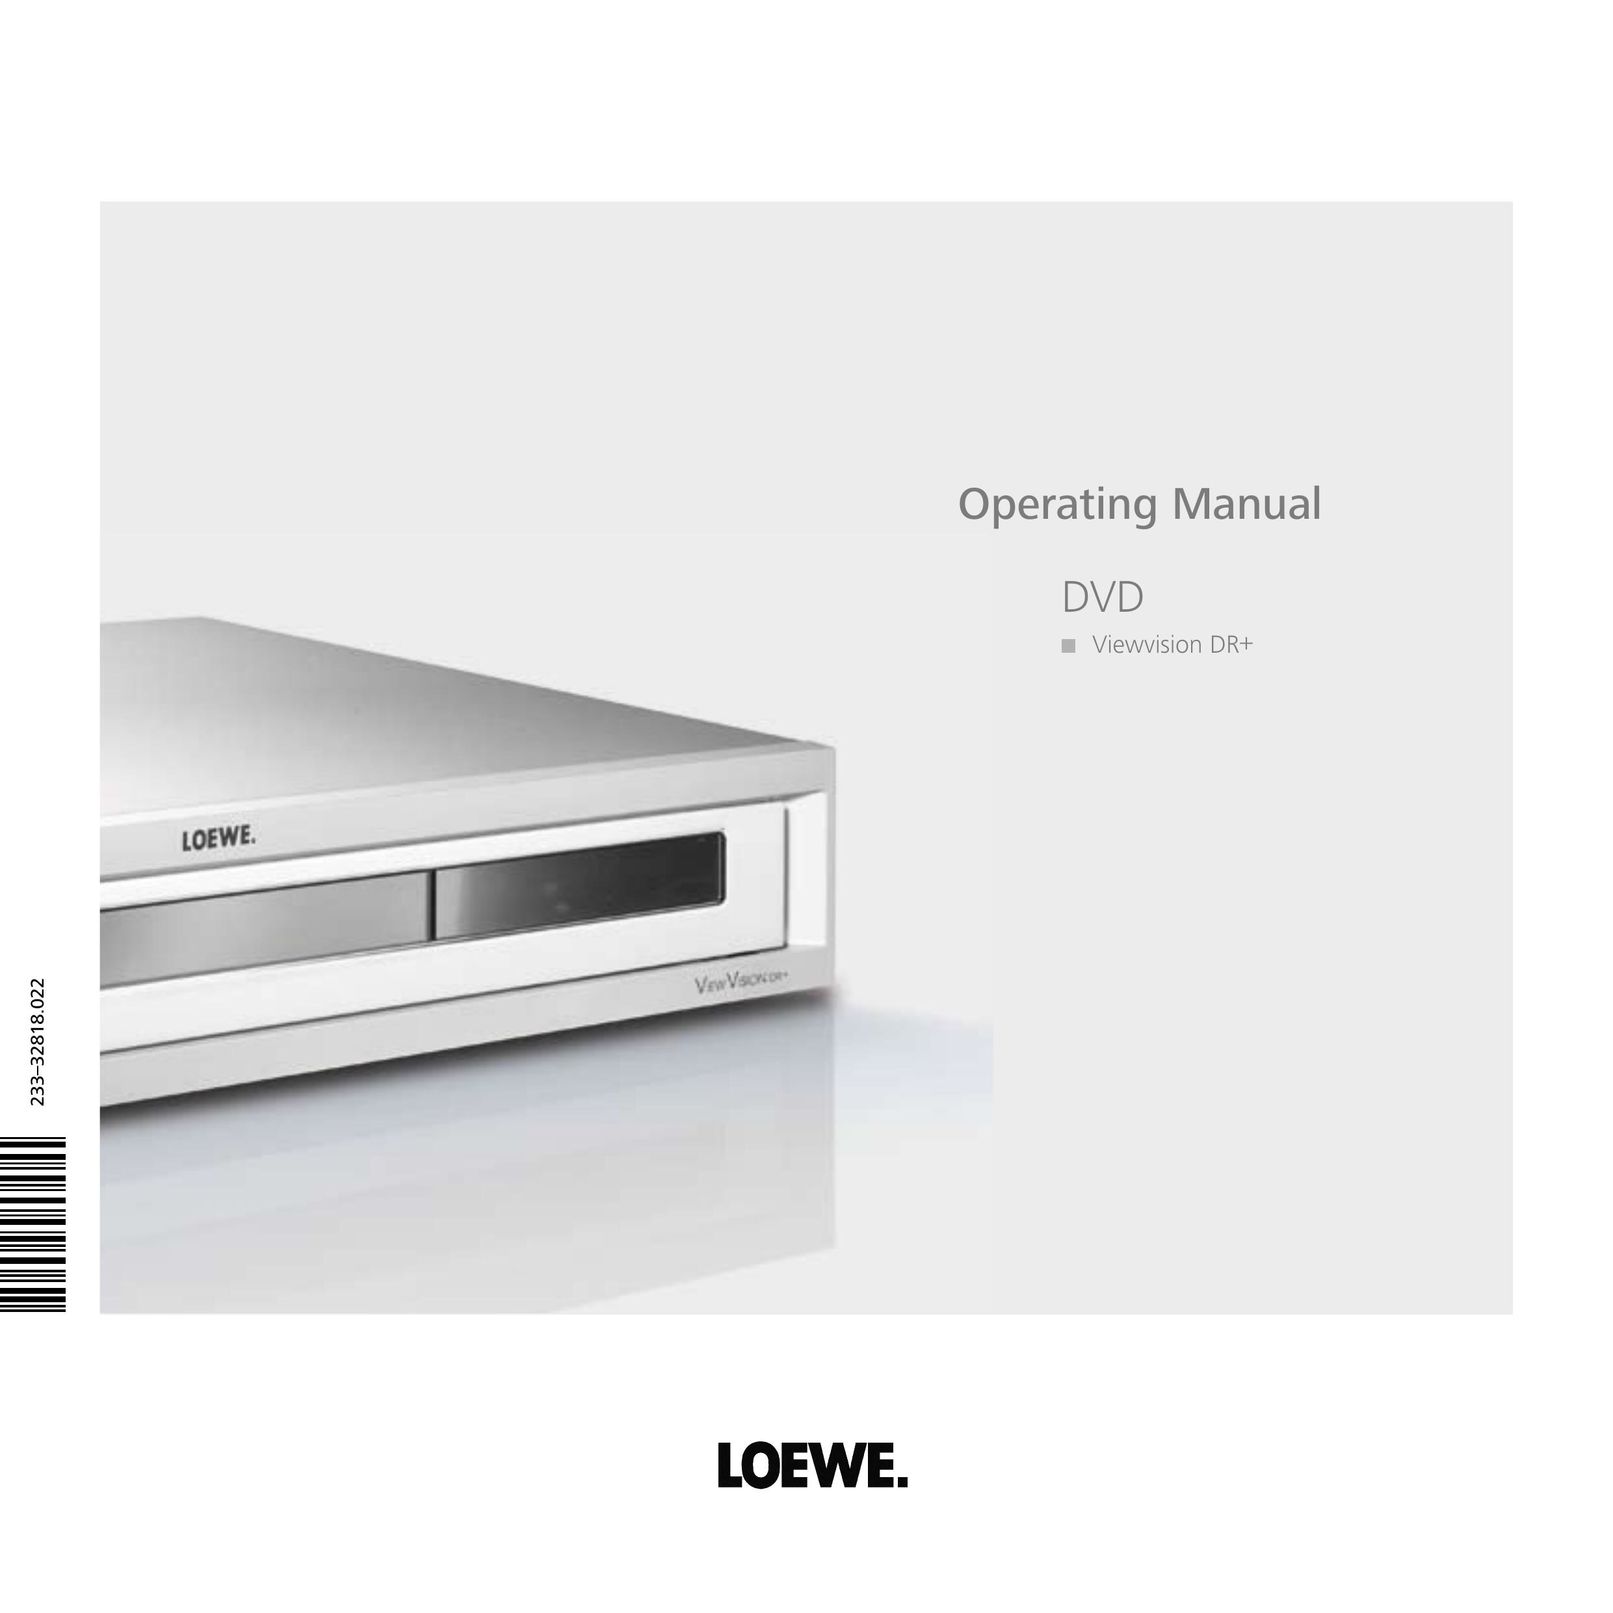 Loewe ViewVision DR+ DVD Player User Manual